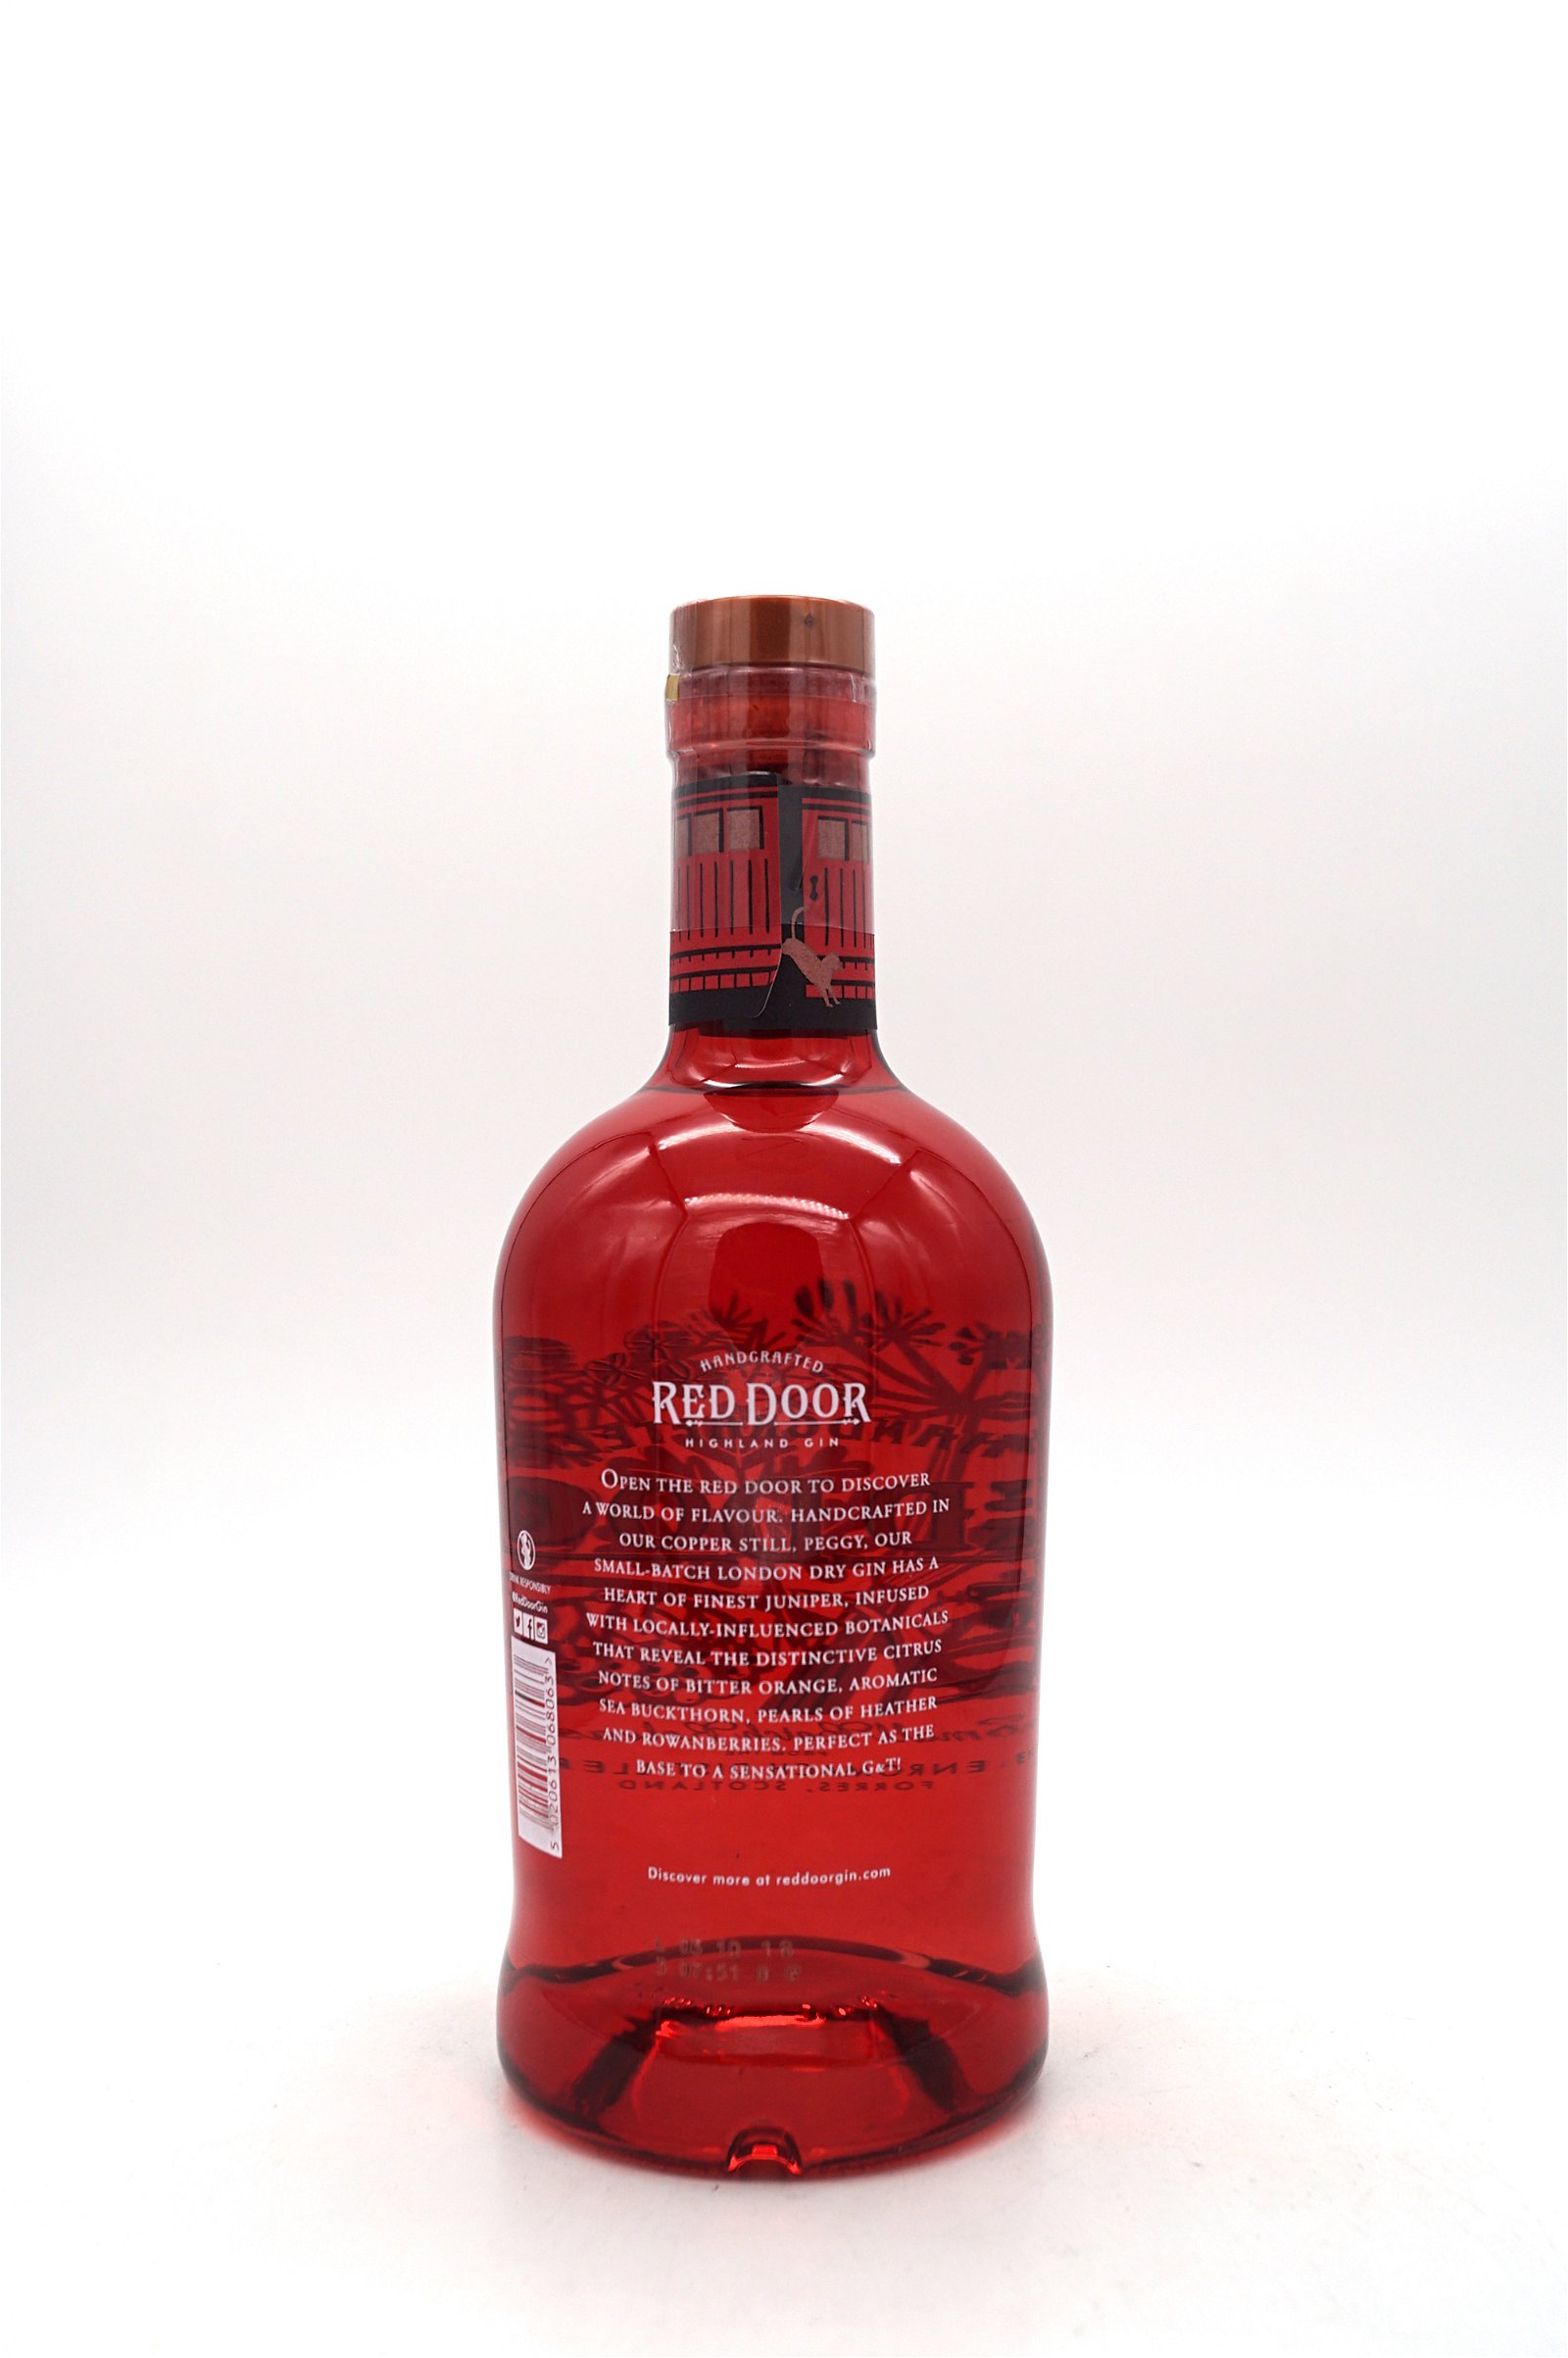 Benromach Red Door Small Batch Release Highland Gin